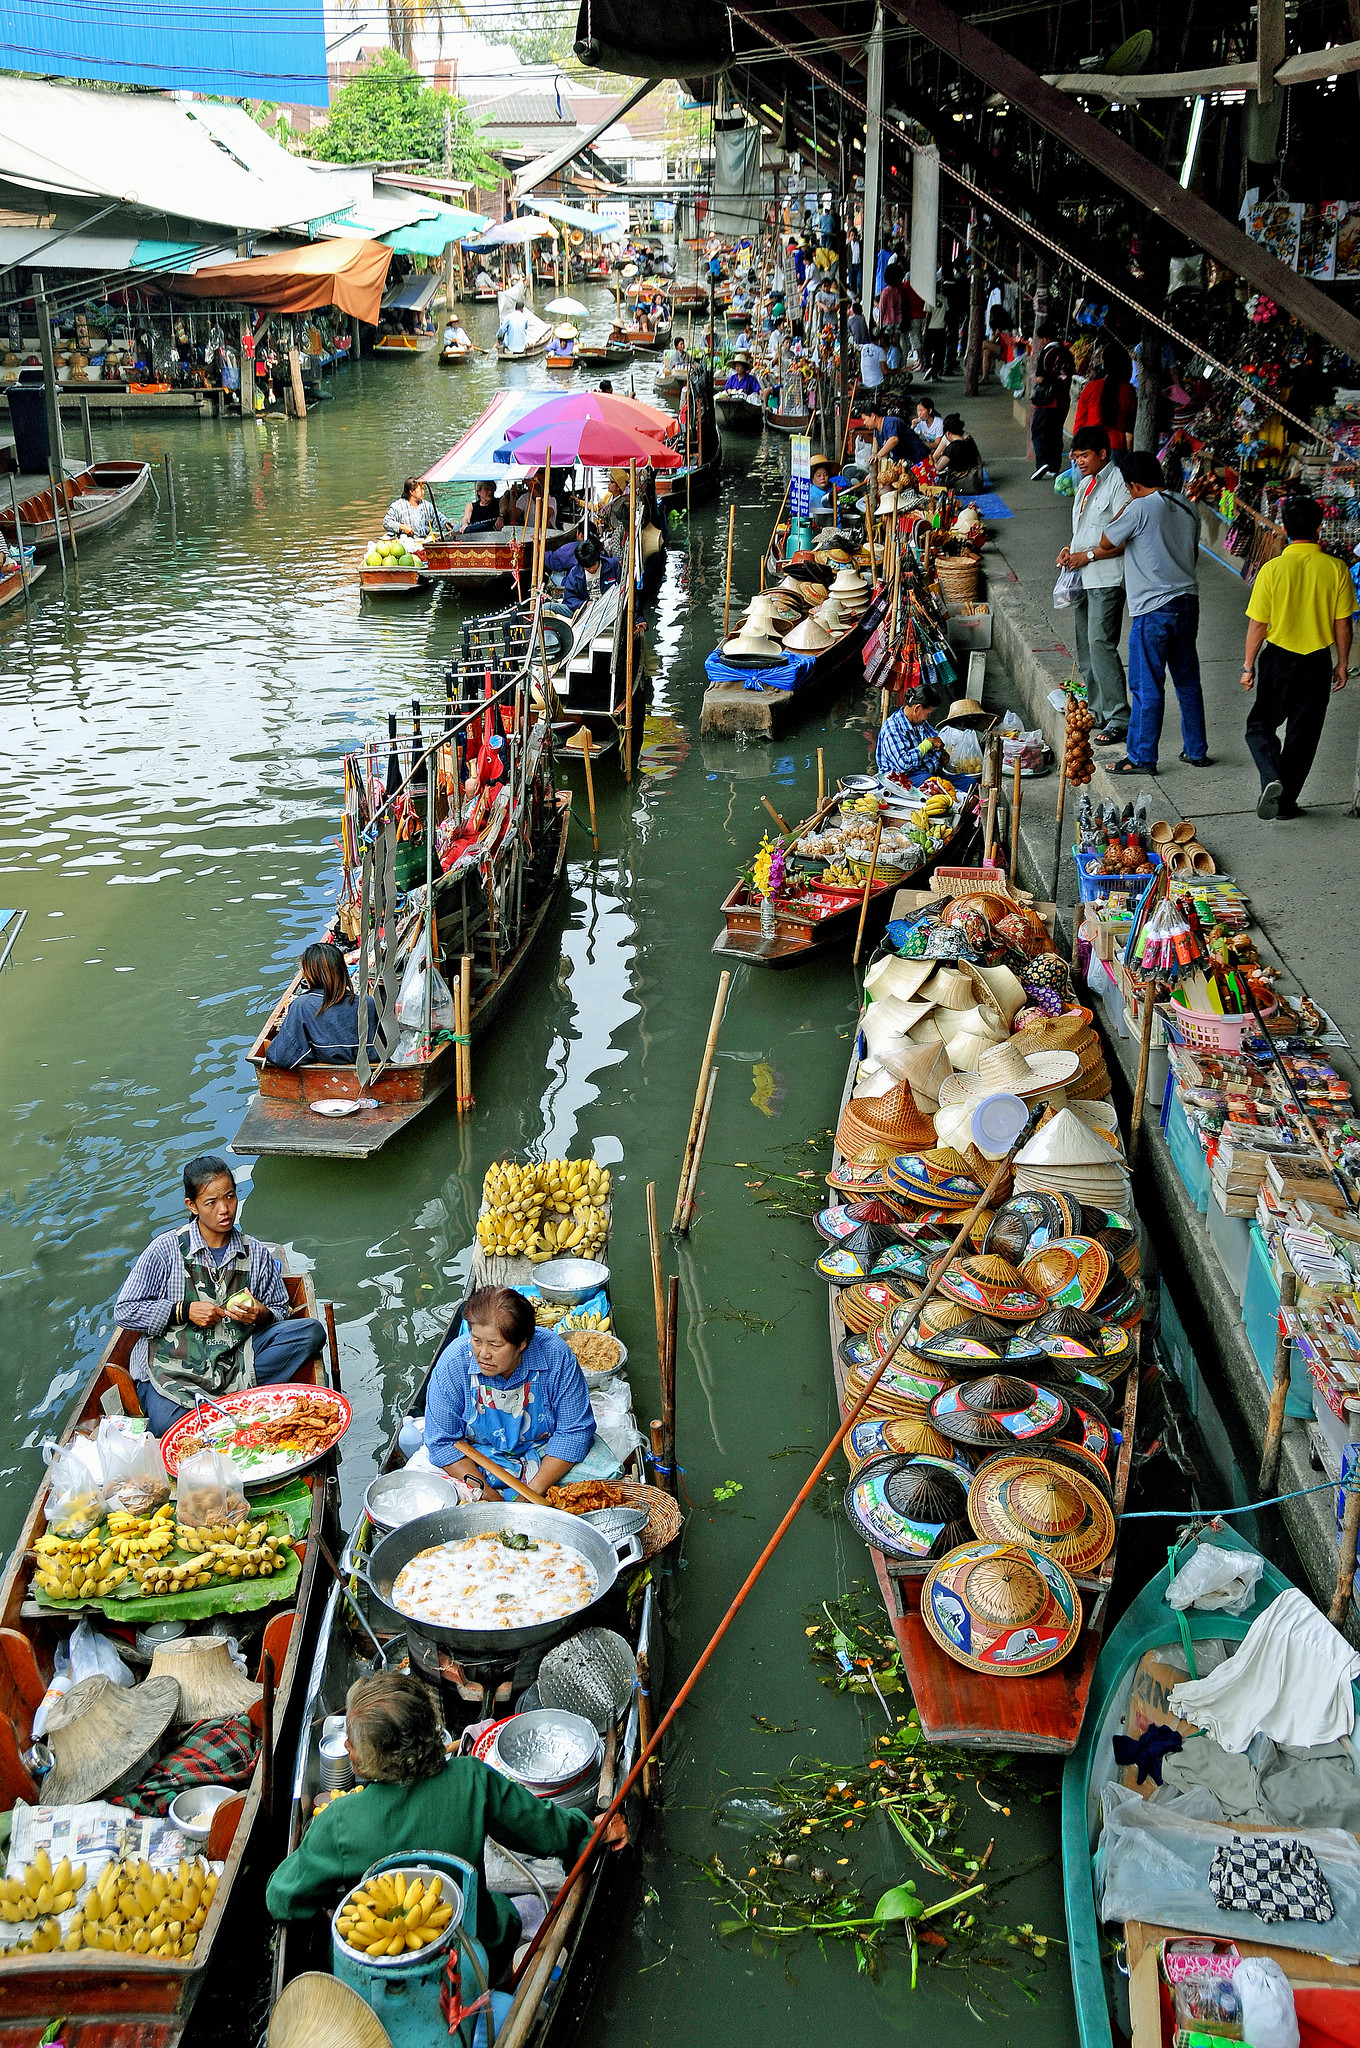 Narrow boats filled with food, clothes, hats, and much more float in a canal alongside a market.